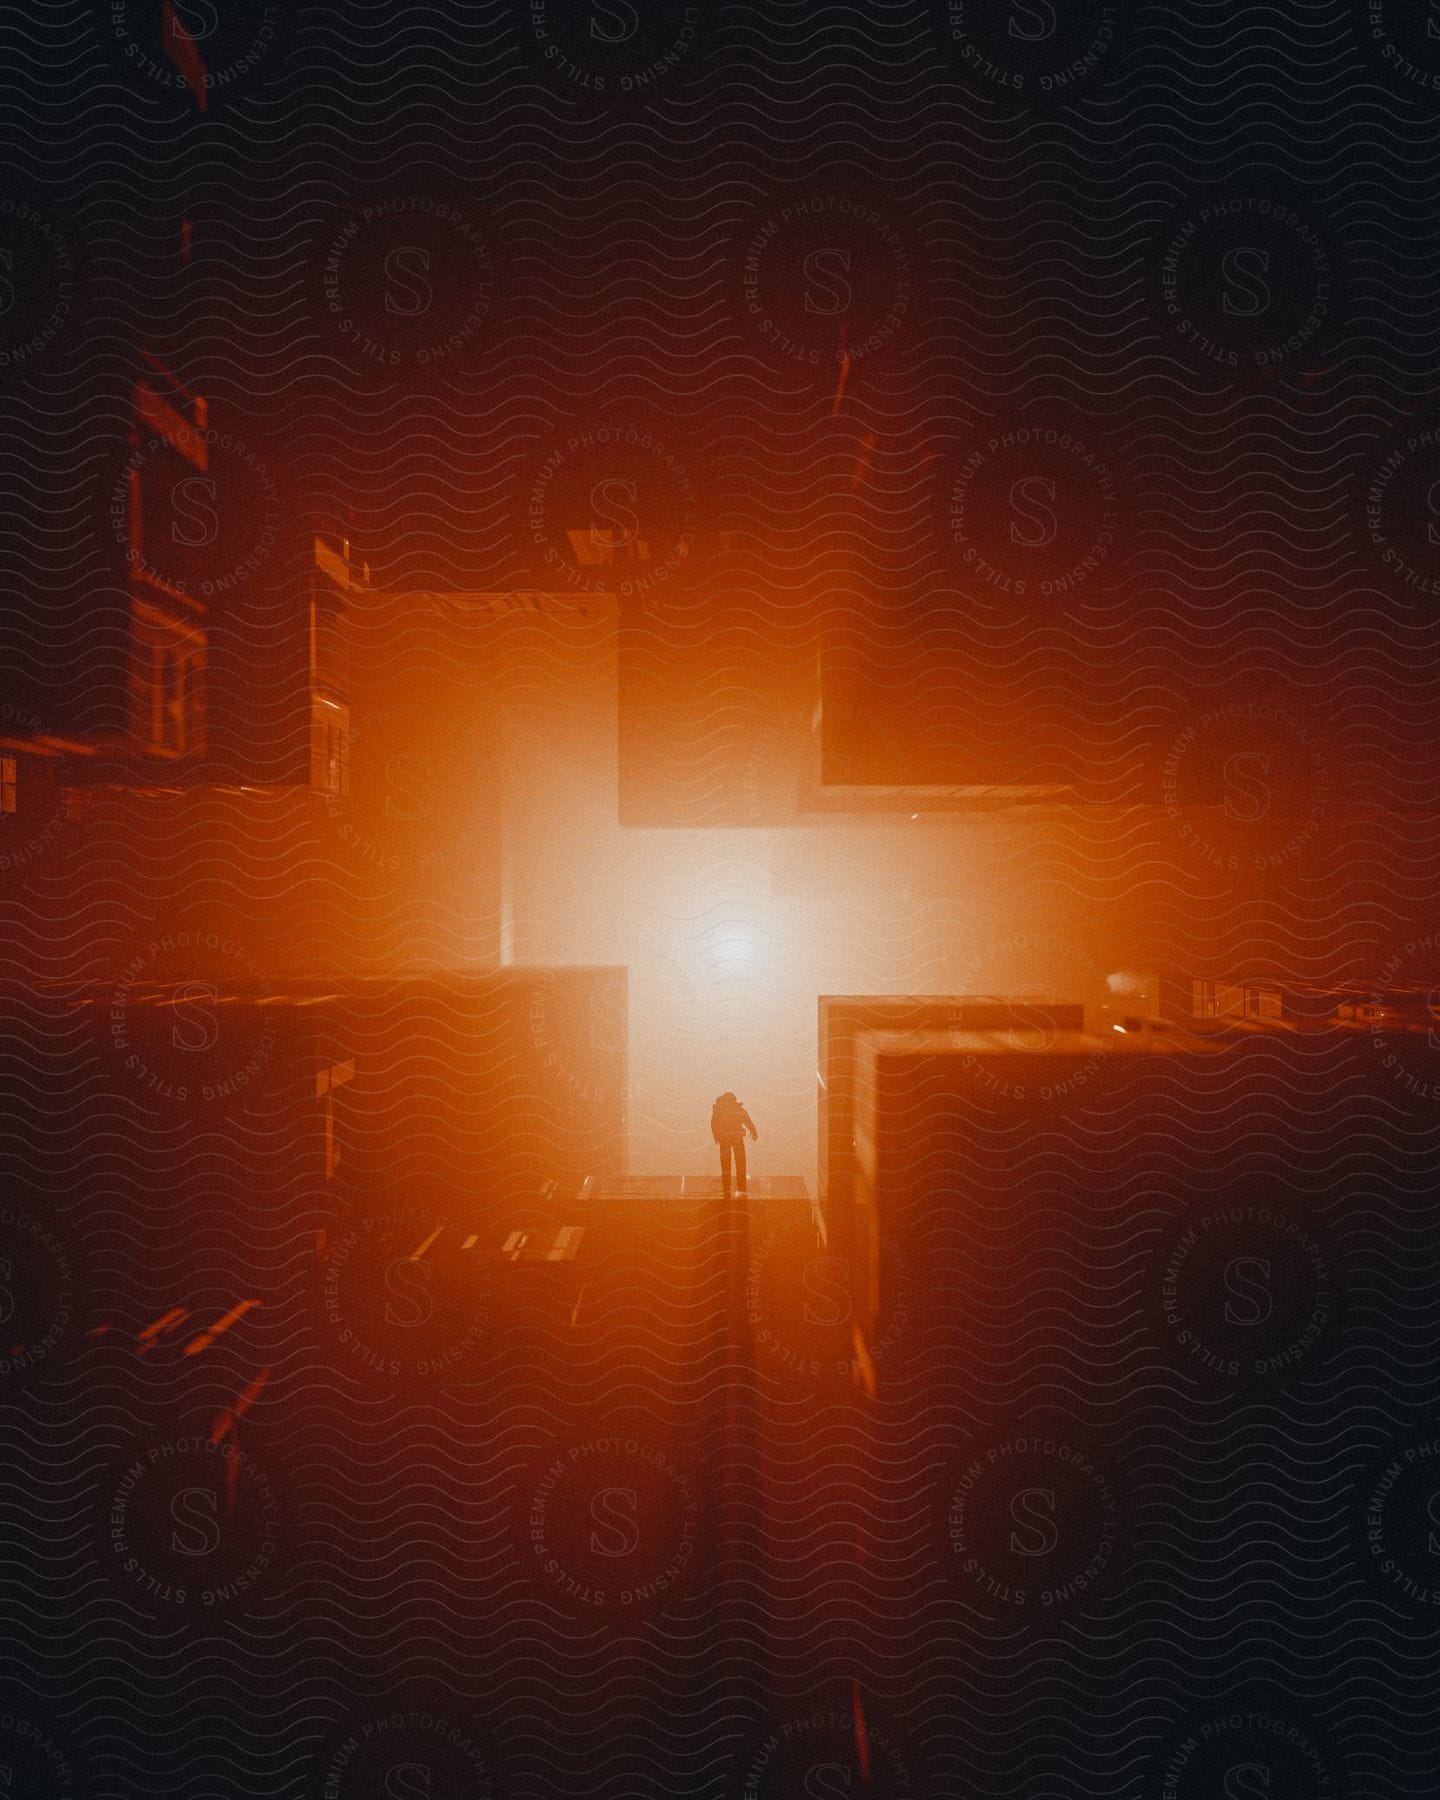 A person stands in front of an orange sun surrounded by squares